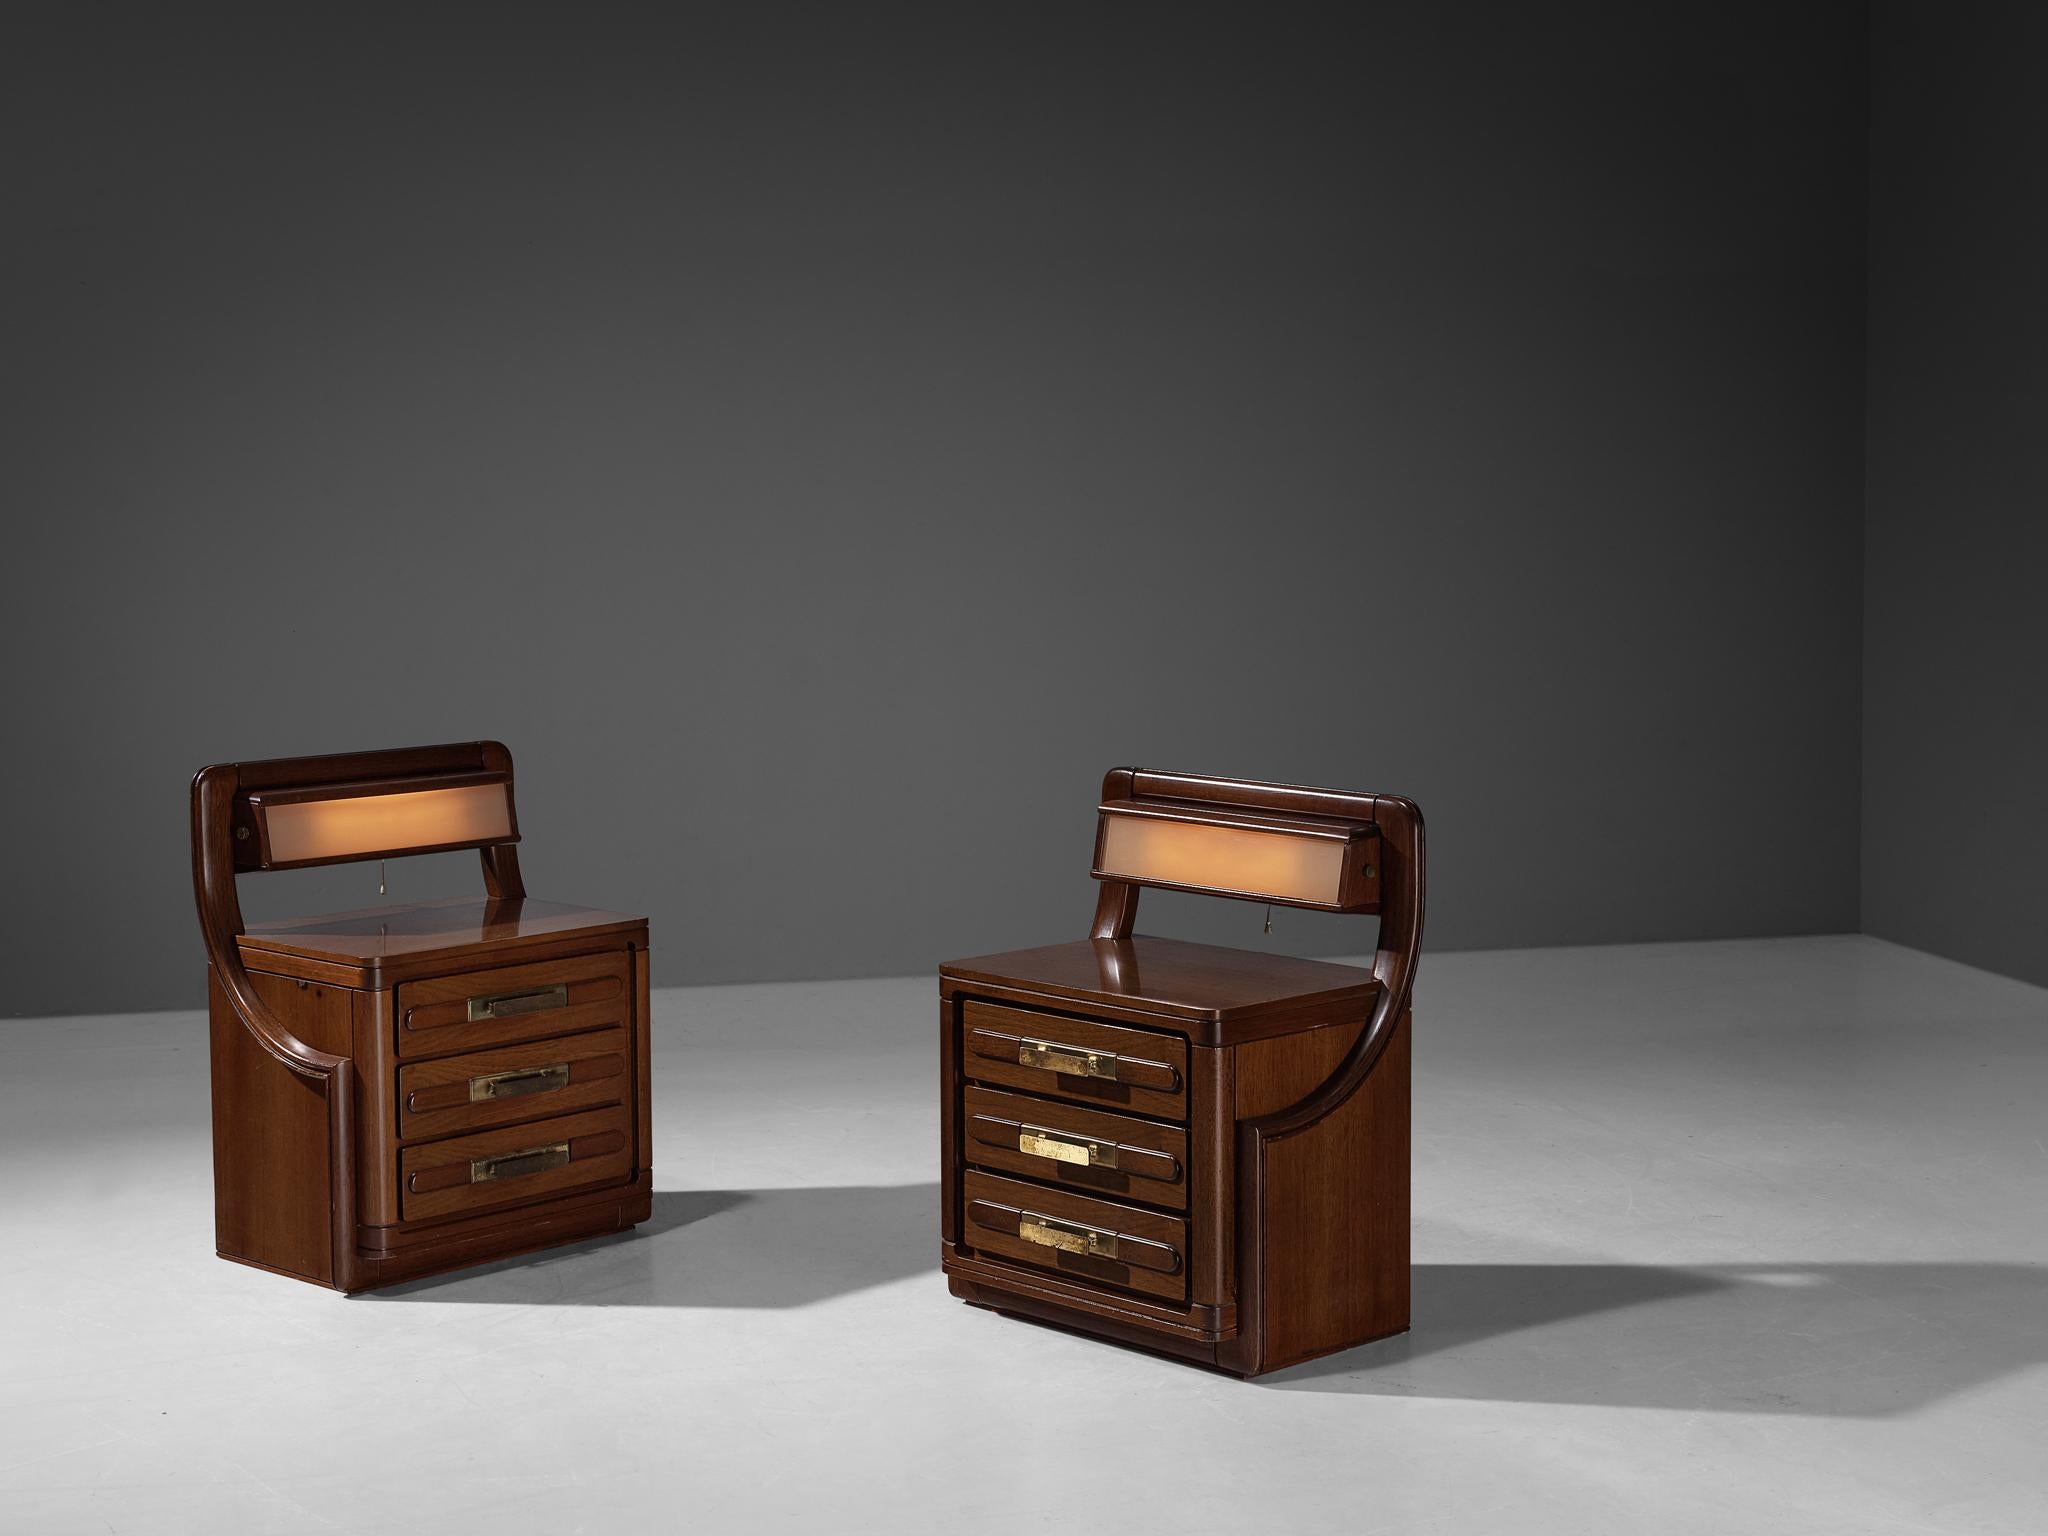 Pair of nightstands, teak, glass, brass, Italy, 1970s.

Charming and chic pair of nightstands made in teak and veneer. The upper part of the nightstands has flattering integrated lighting that shines through a pink matte glass cover. They have